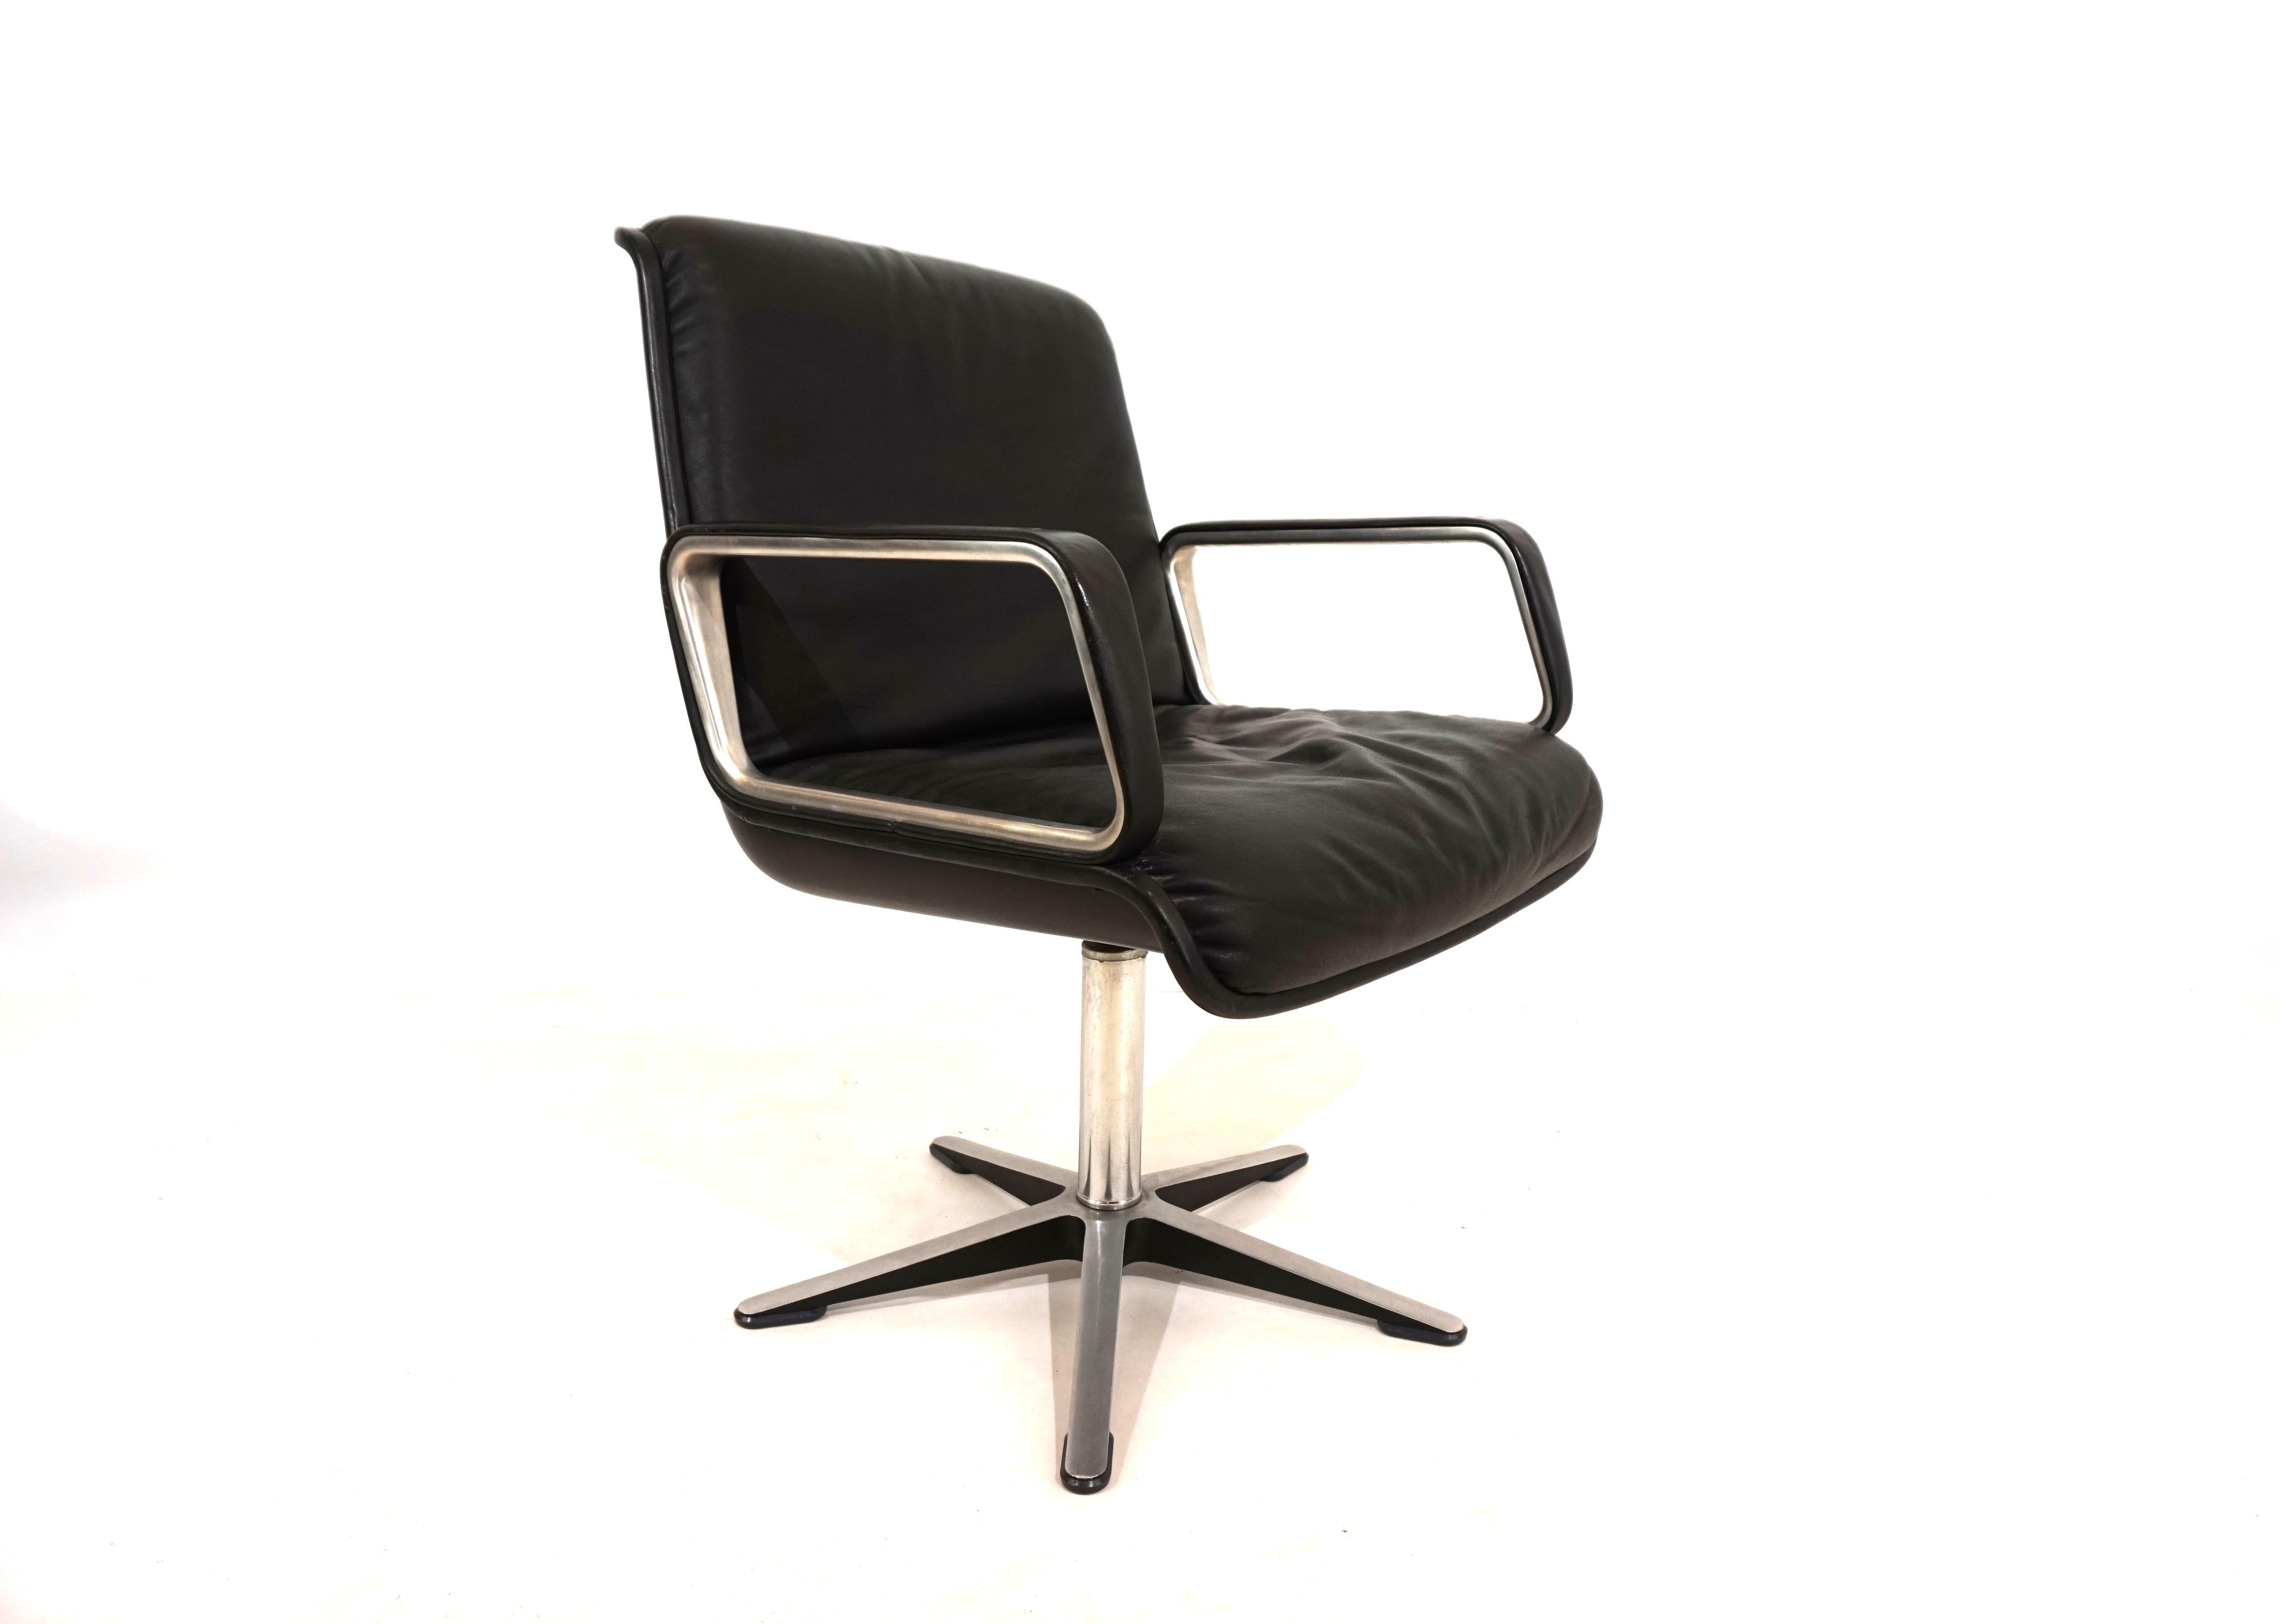 Leather Wilkhahn Delta leather dining/conference chair from Delta Design